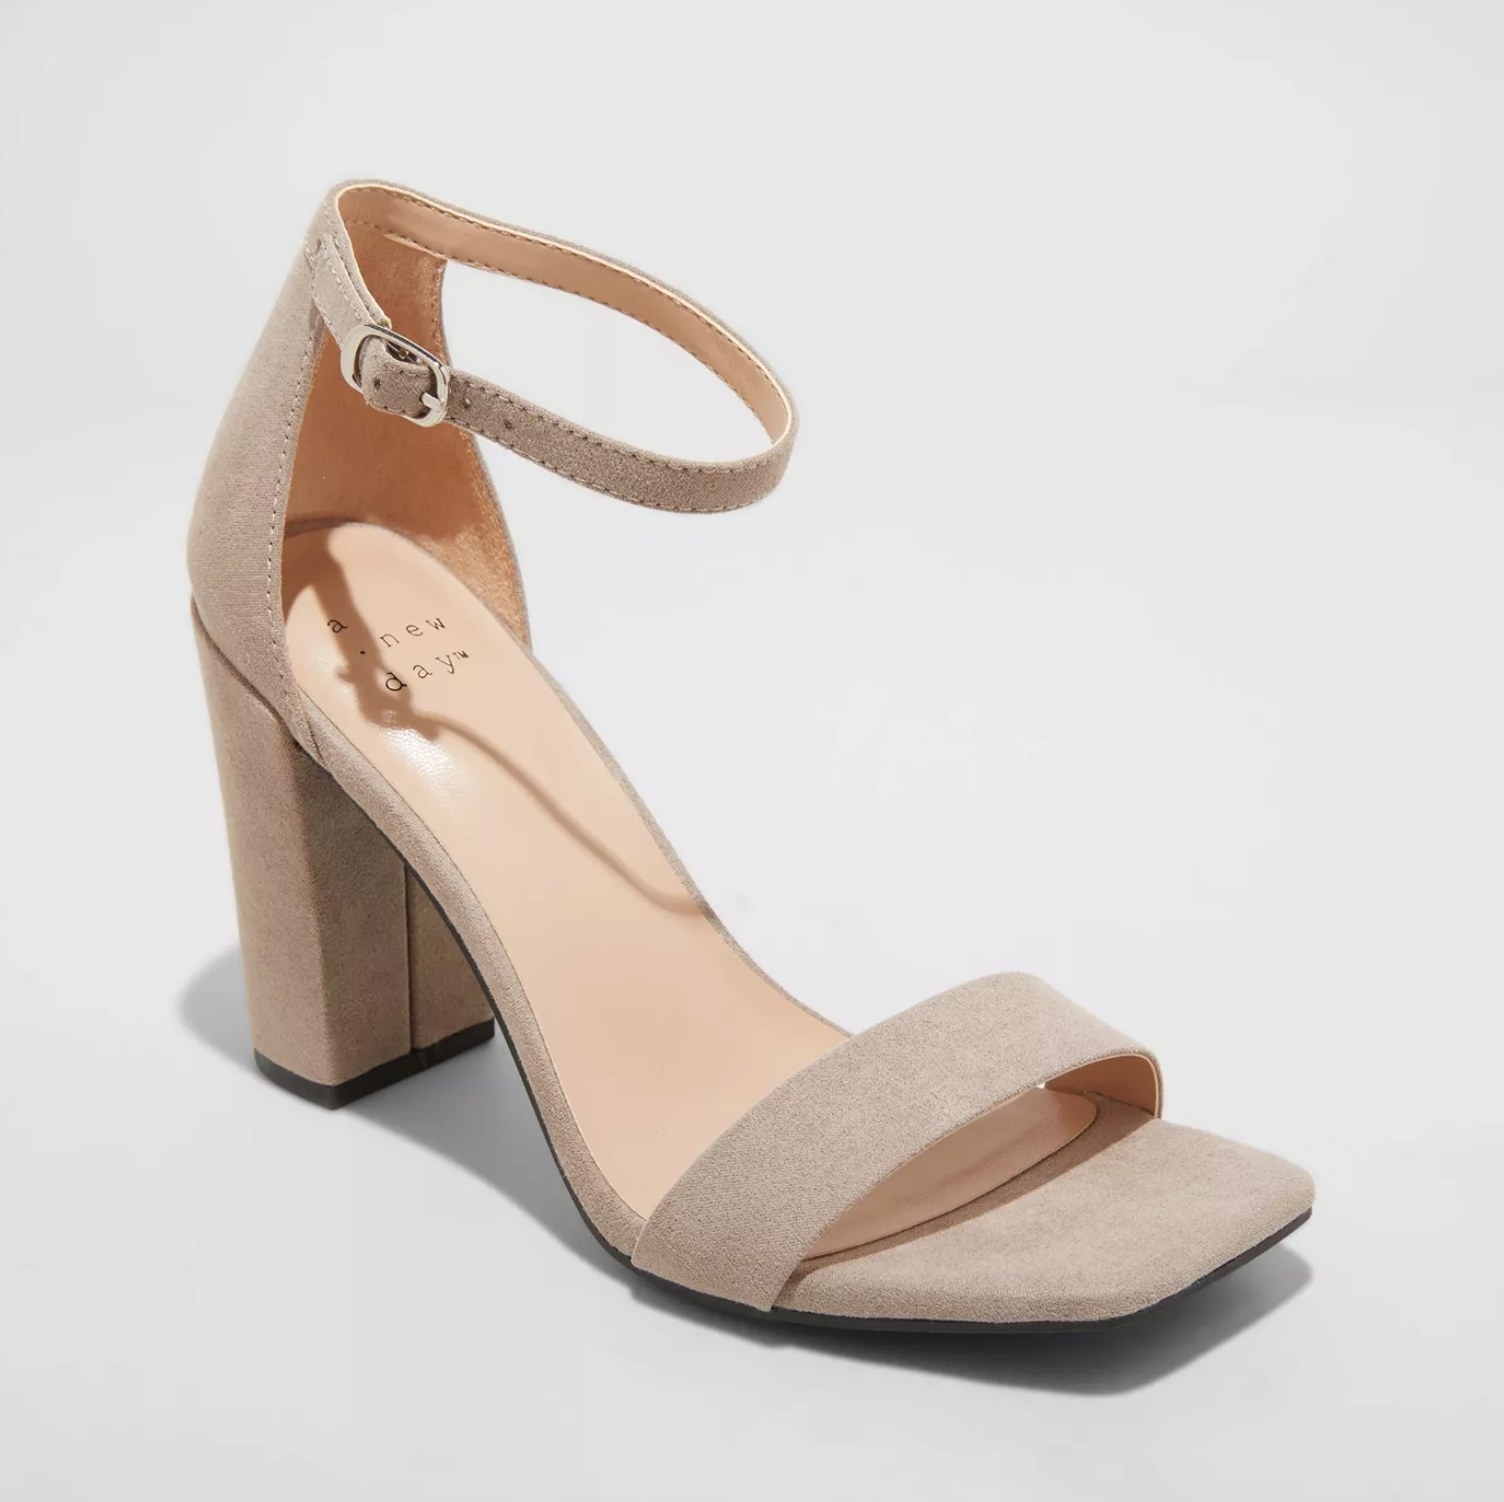 The sandal pumps in the color gray